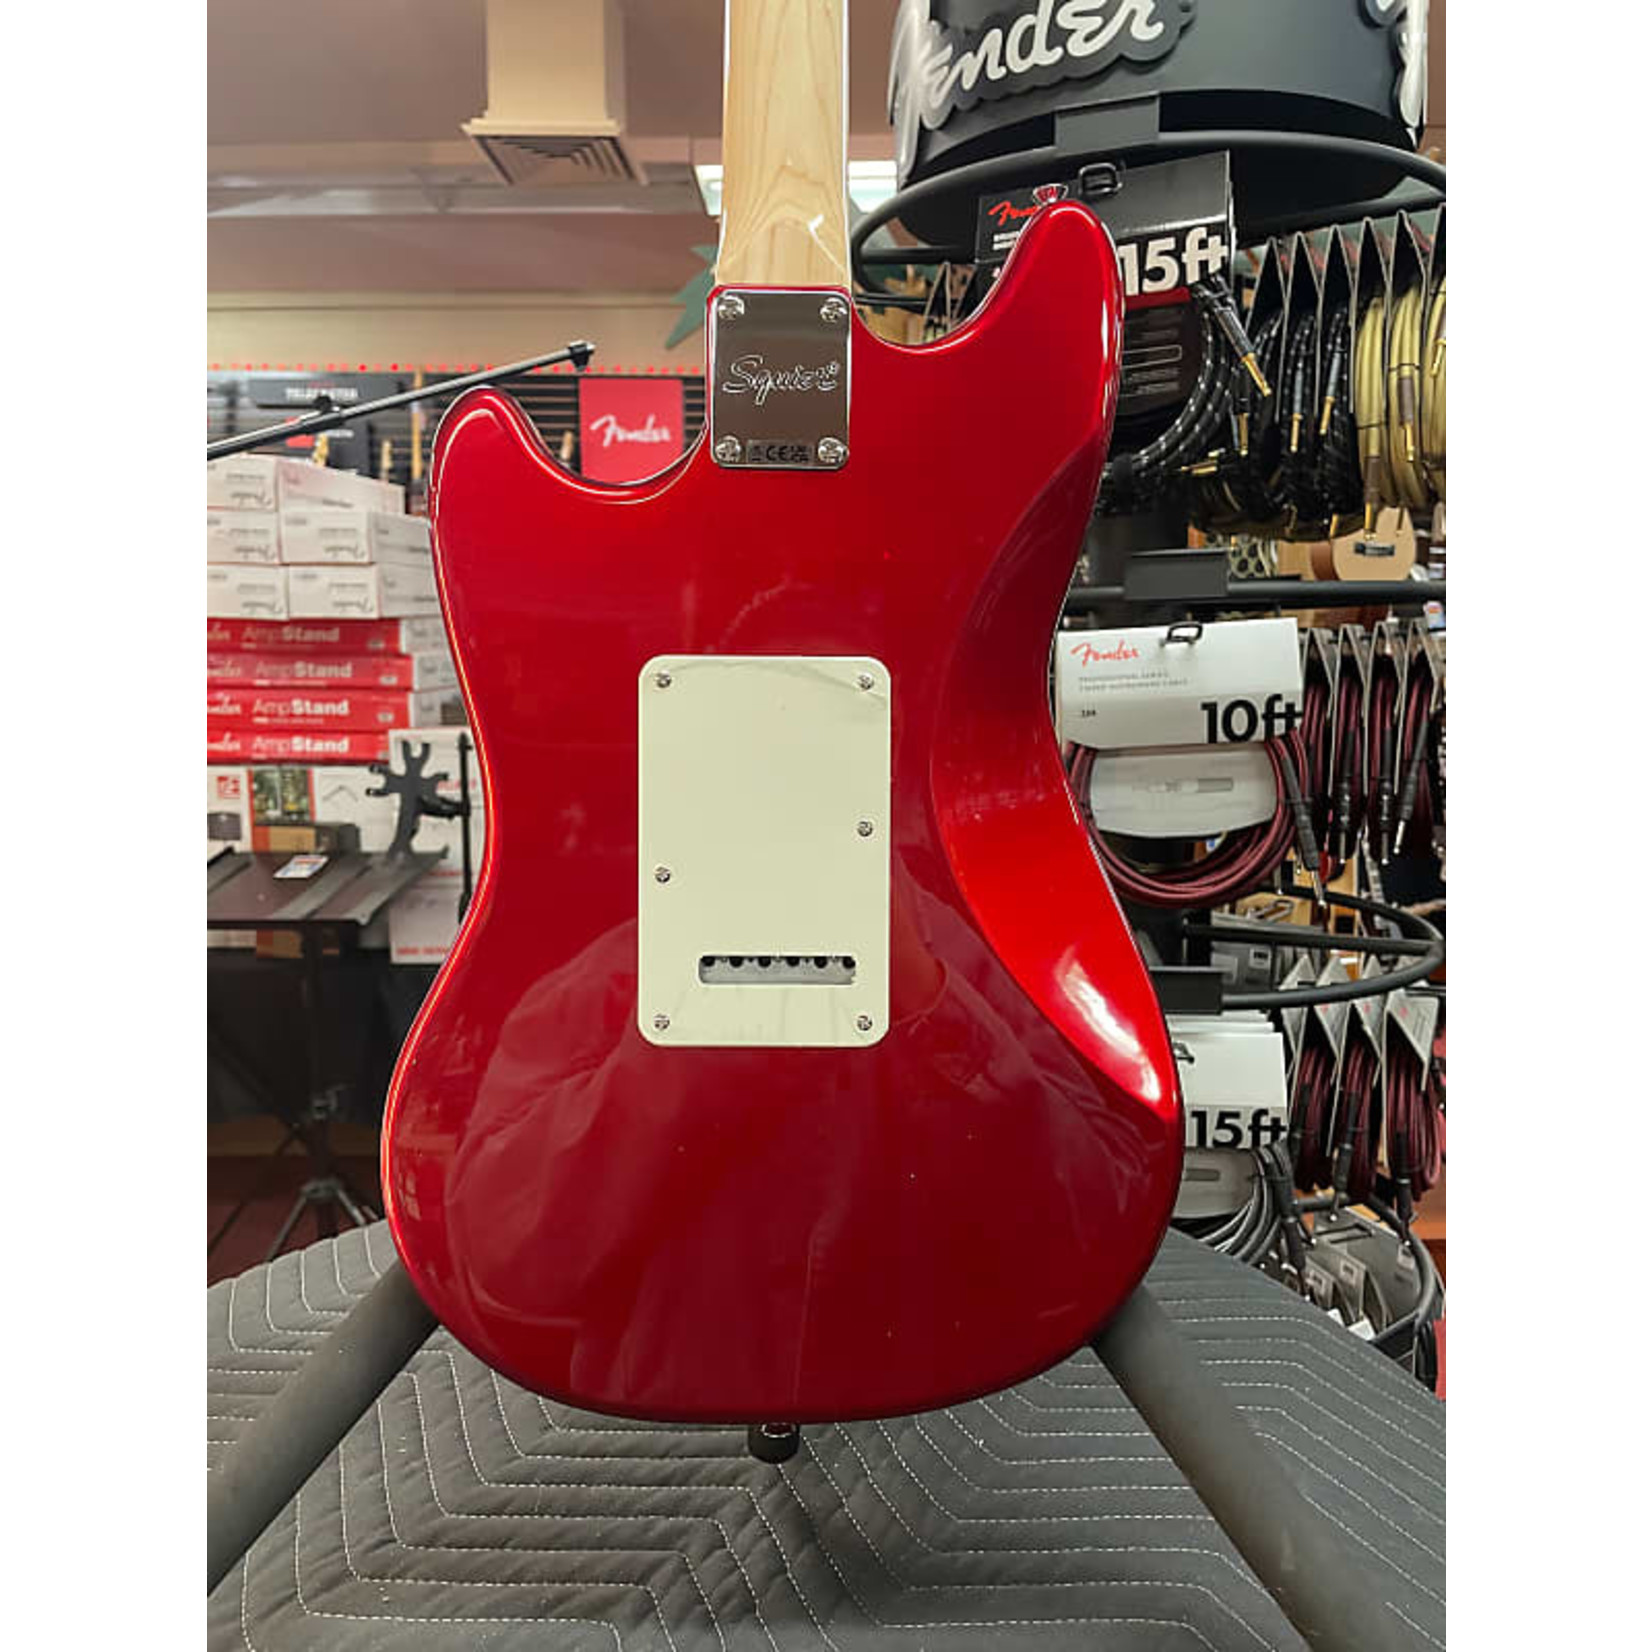 Squier Squier Paranormal Cyclone Candy Apple Red